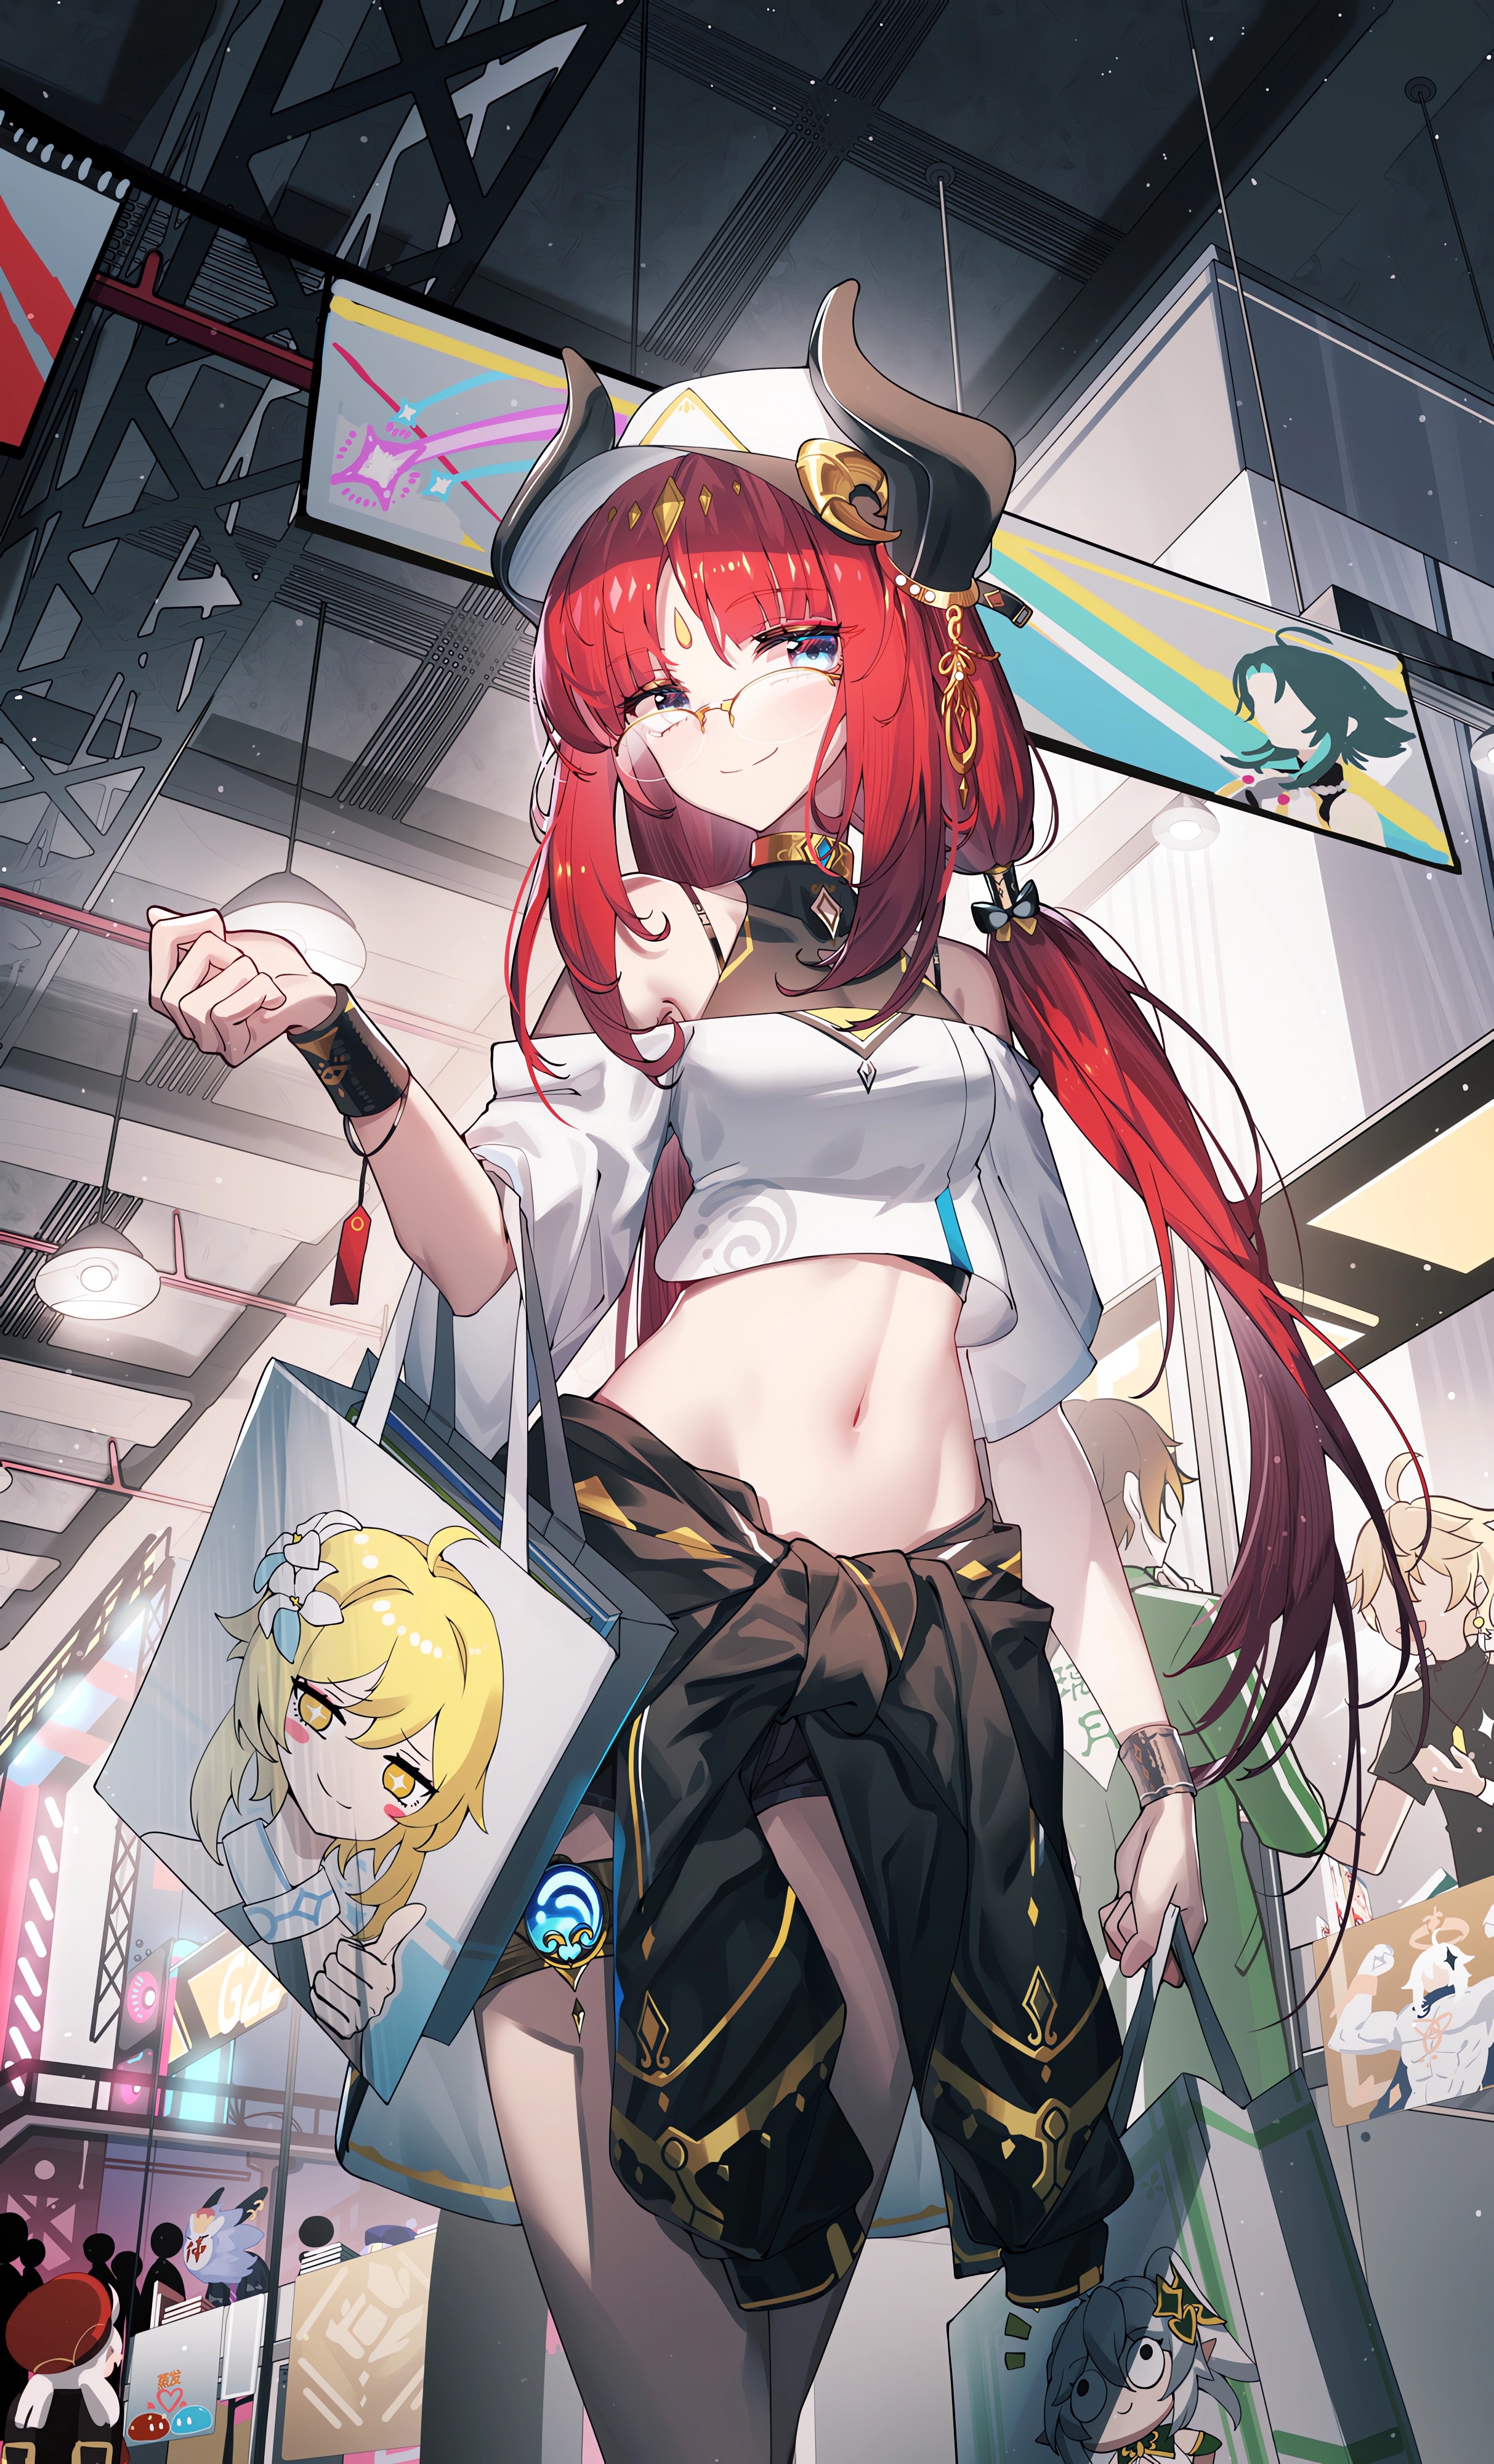 Anime 2426x4000 anime anime girls Nilou (Genshin Impact) Lumine (Genshin Impact) Genshin Impact long hair smiling glasses standing portrait display looking at viewer redhead thumbs up twintails hat horns Paimon (Genshin Impact)